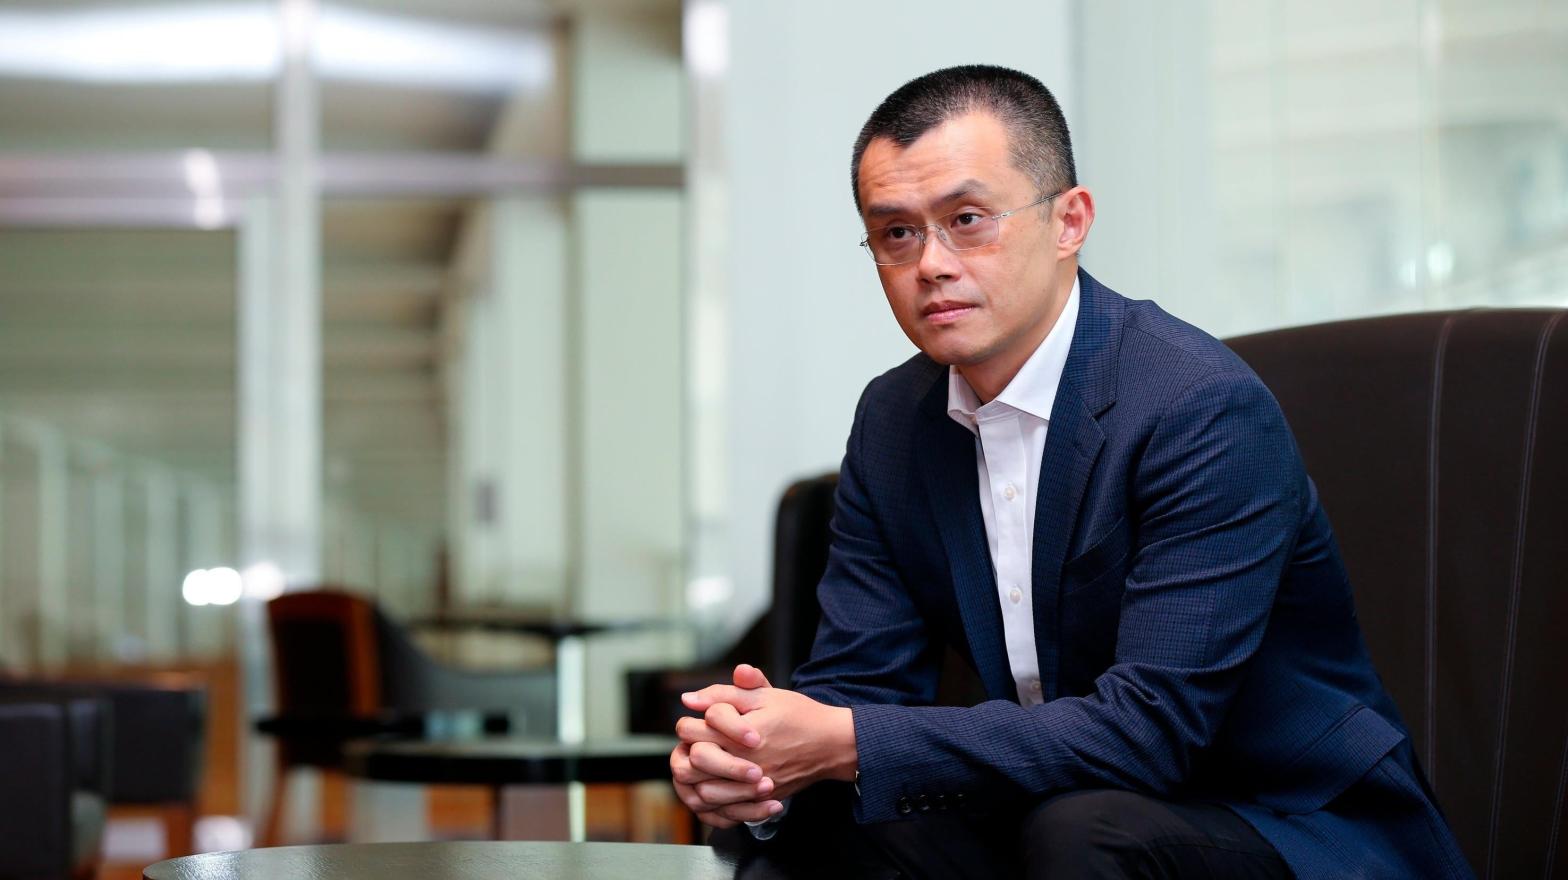 Binance CEO Changpeng Zhao has taken a few blows over the past moth, especially since his company was hit with a lawsuit alleging he's failed to register Binance as a futures trader in the U.S. (Photo: Singapore Press, AP)